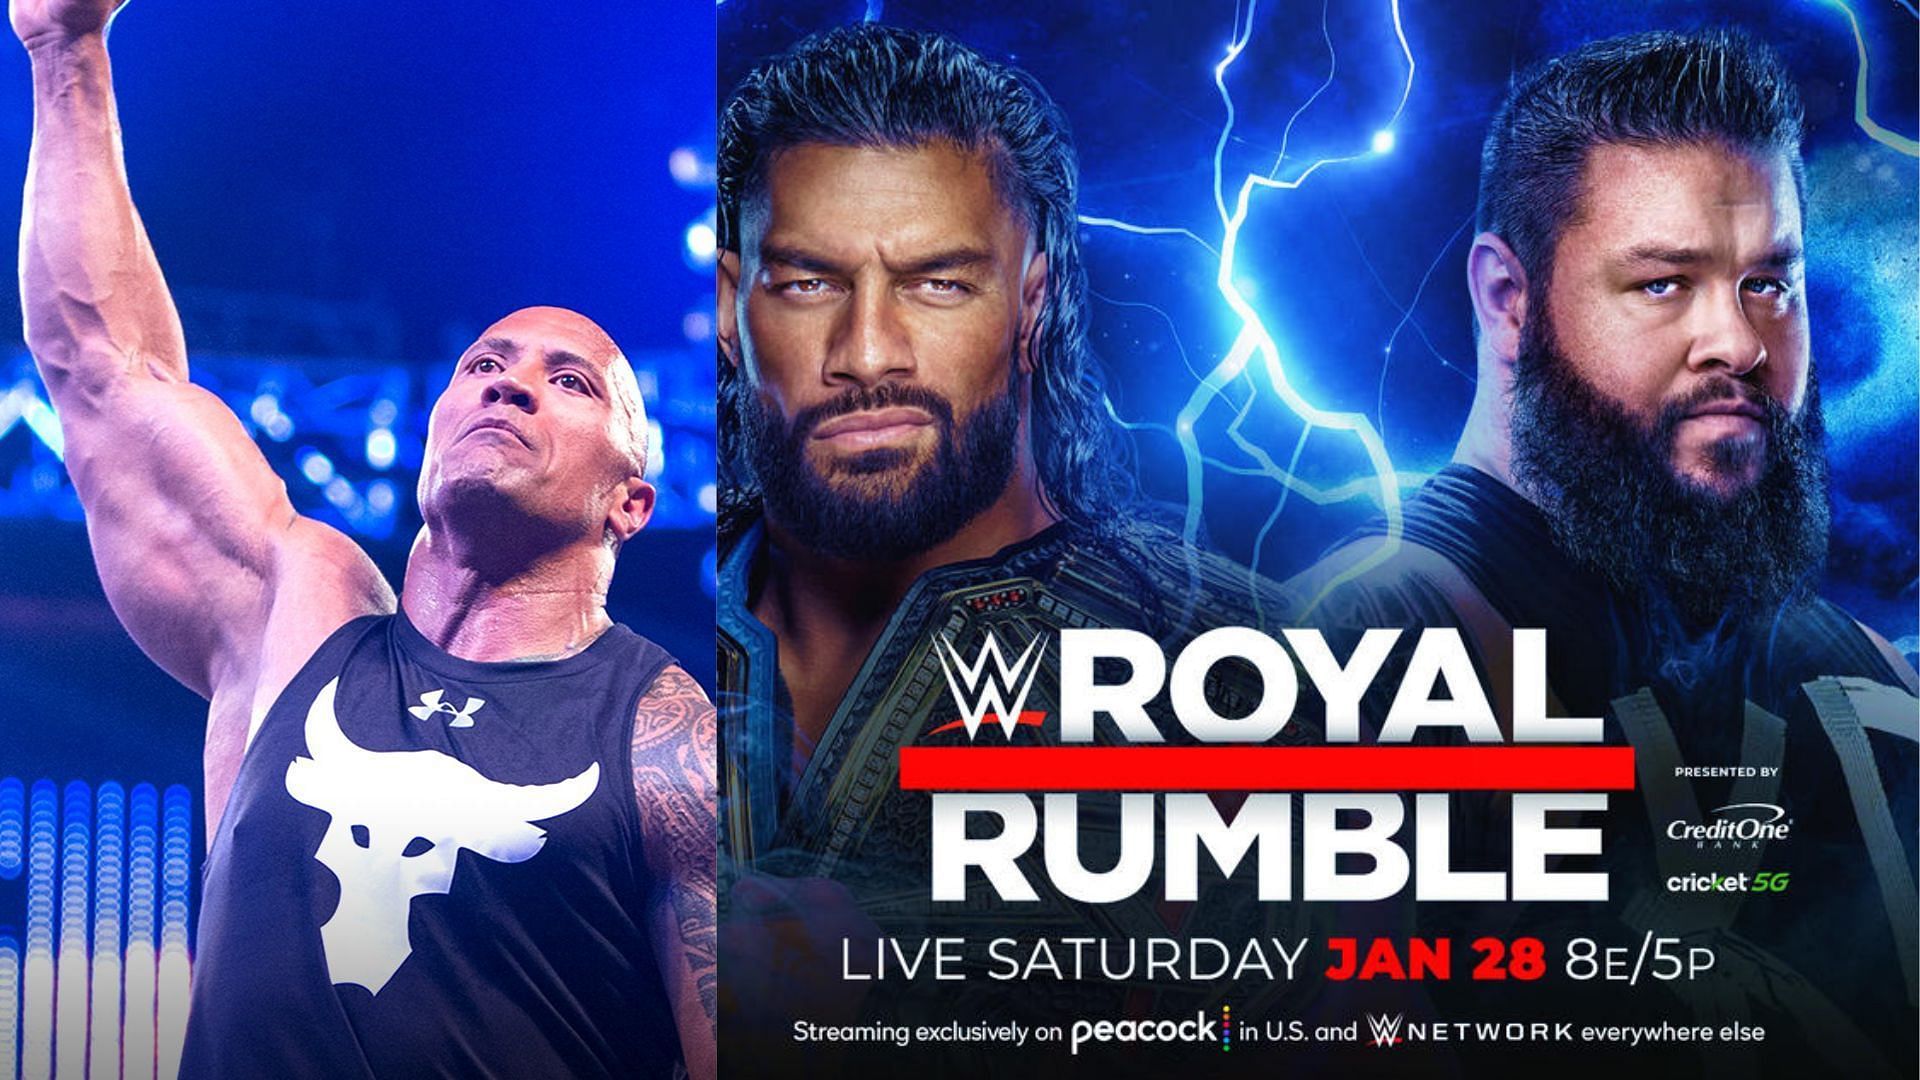 Is The Rock returning at WWE Royal Rumble 2023?